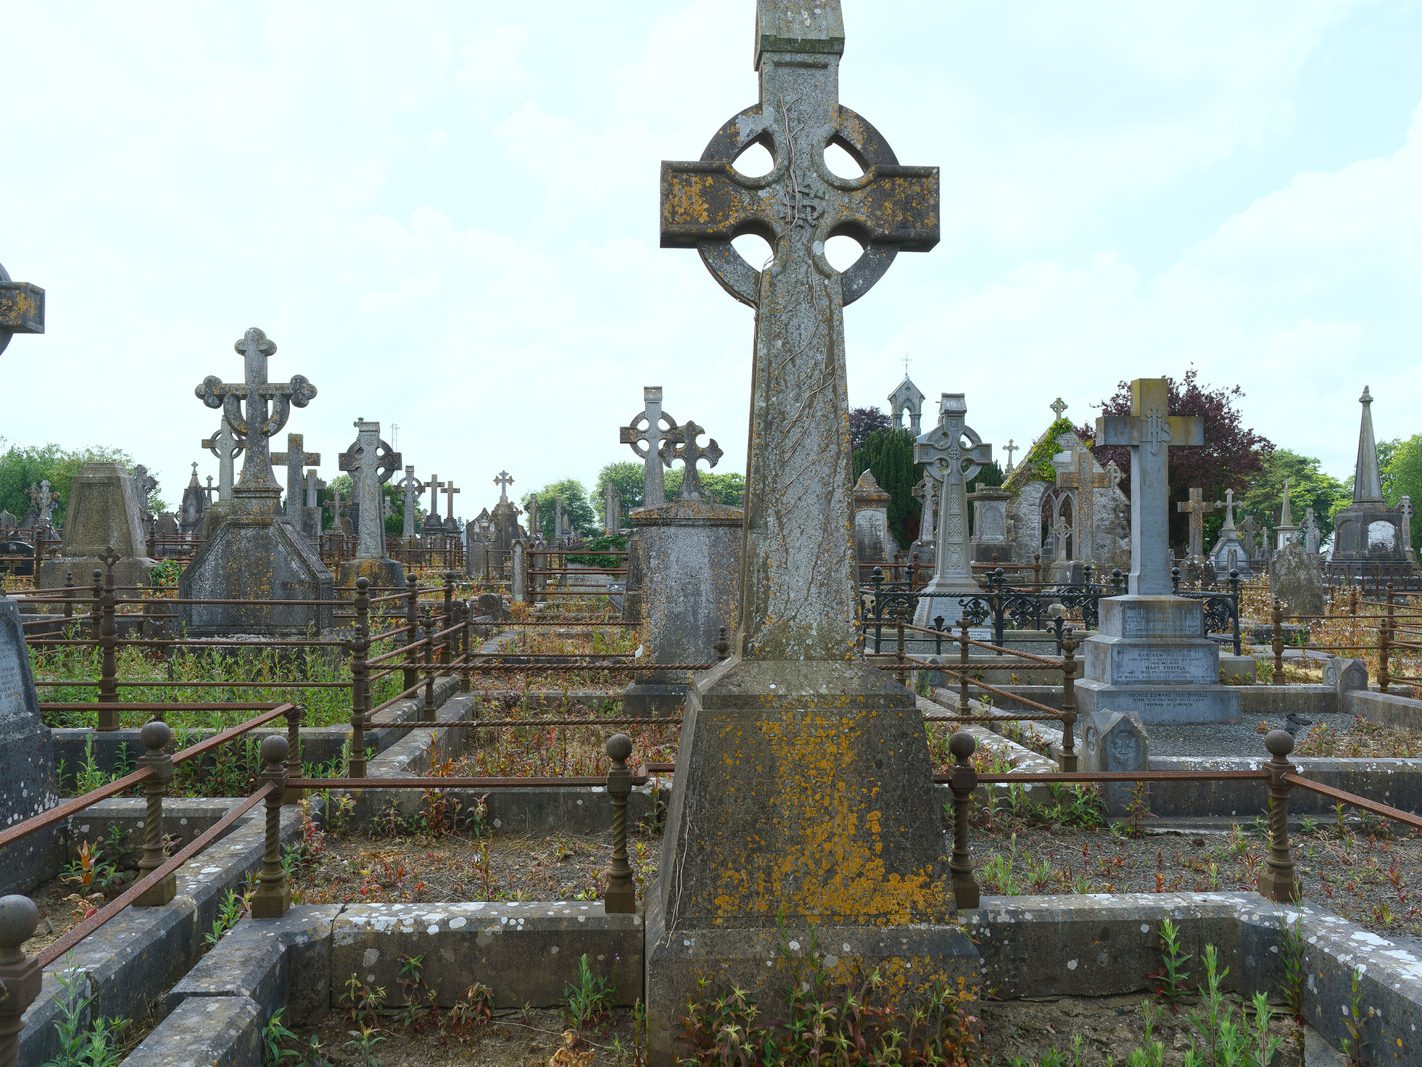 MY FIRST VISIT TO MOUNT ST LAWRENCE CEMETERY[LIMERICK JULY 2016]-227710-1